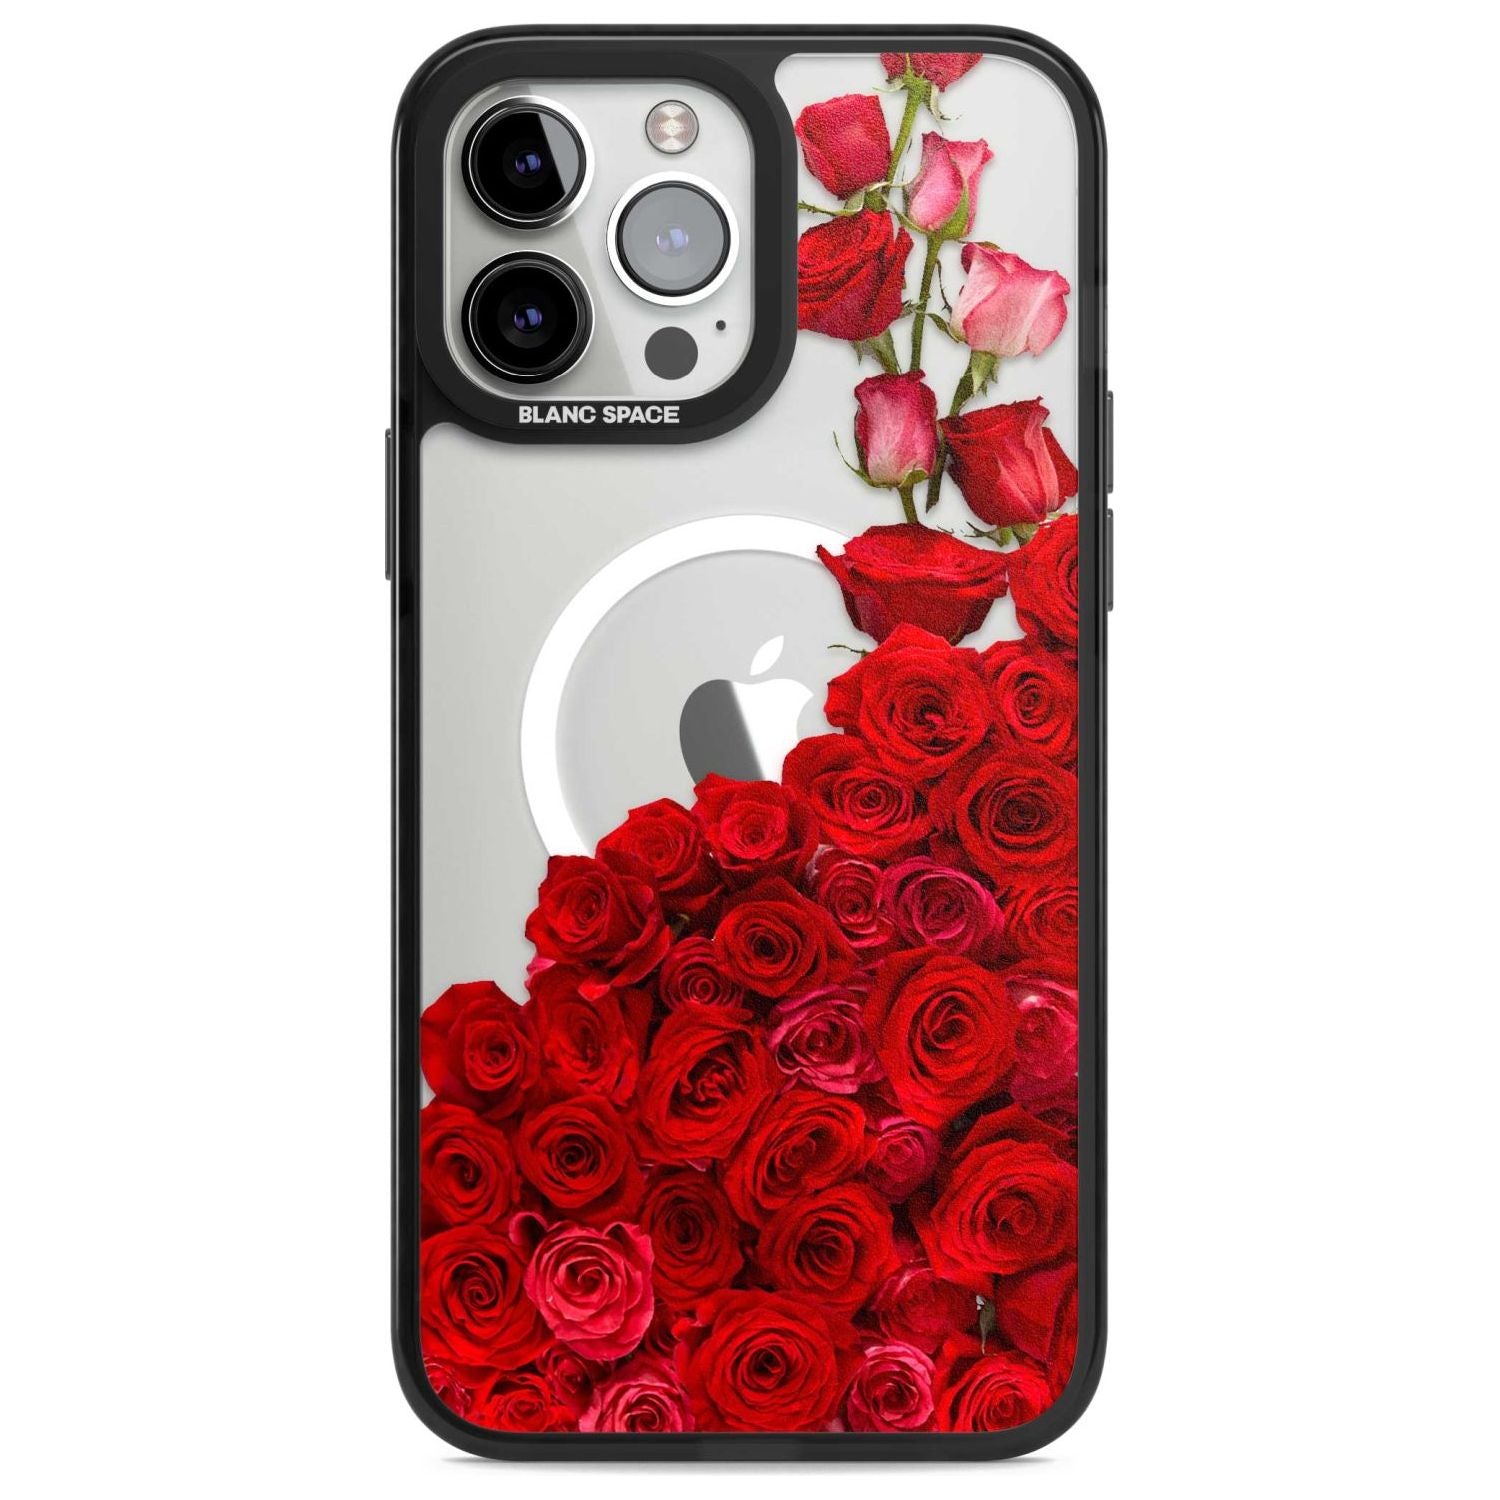 Floral Roses Phone Case iPhone 13 Pro Max / Magsafe Black Impact Case Blanc Space